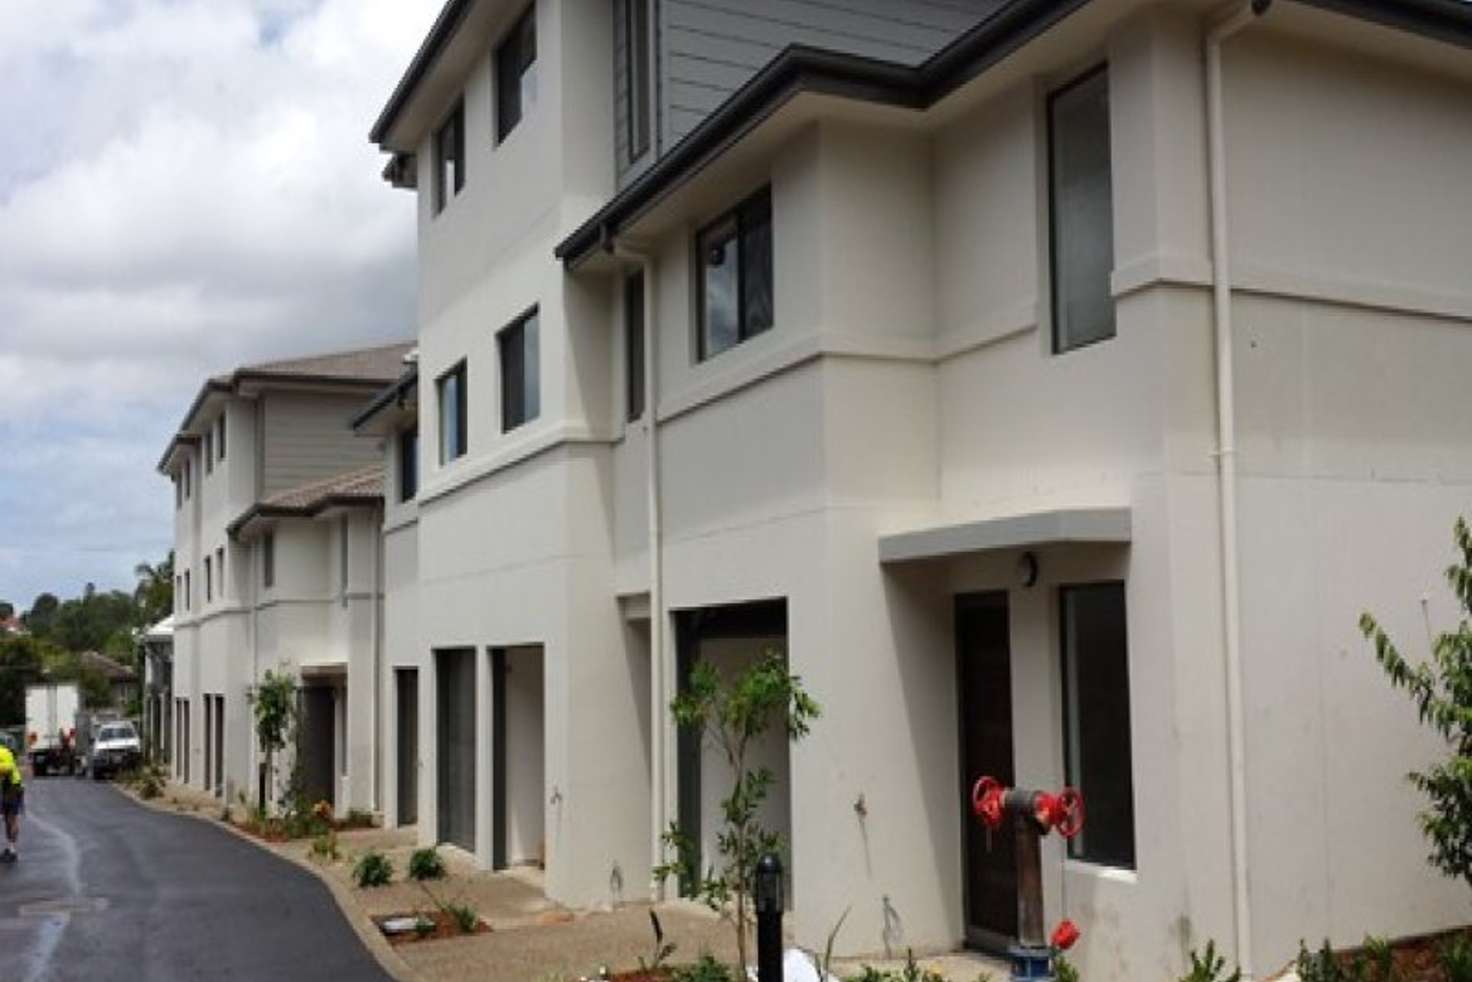 Main view of Homely townhouse listing, U44/395 Zillmere Road, Zillmere QLD 4034, Australia, Zillmere QLD 4034